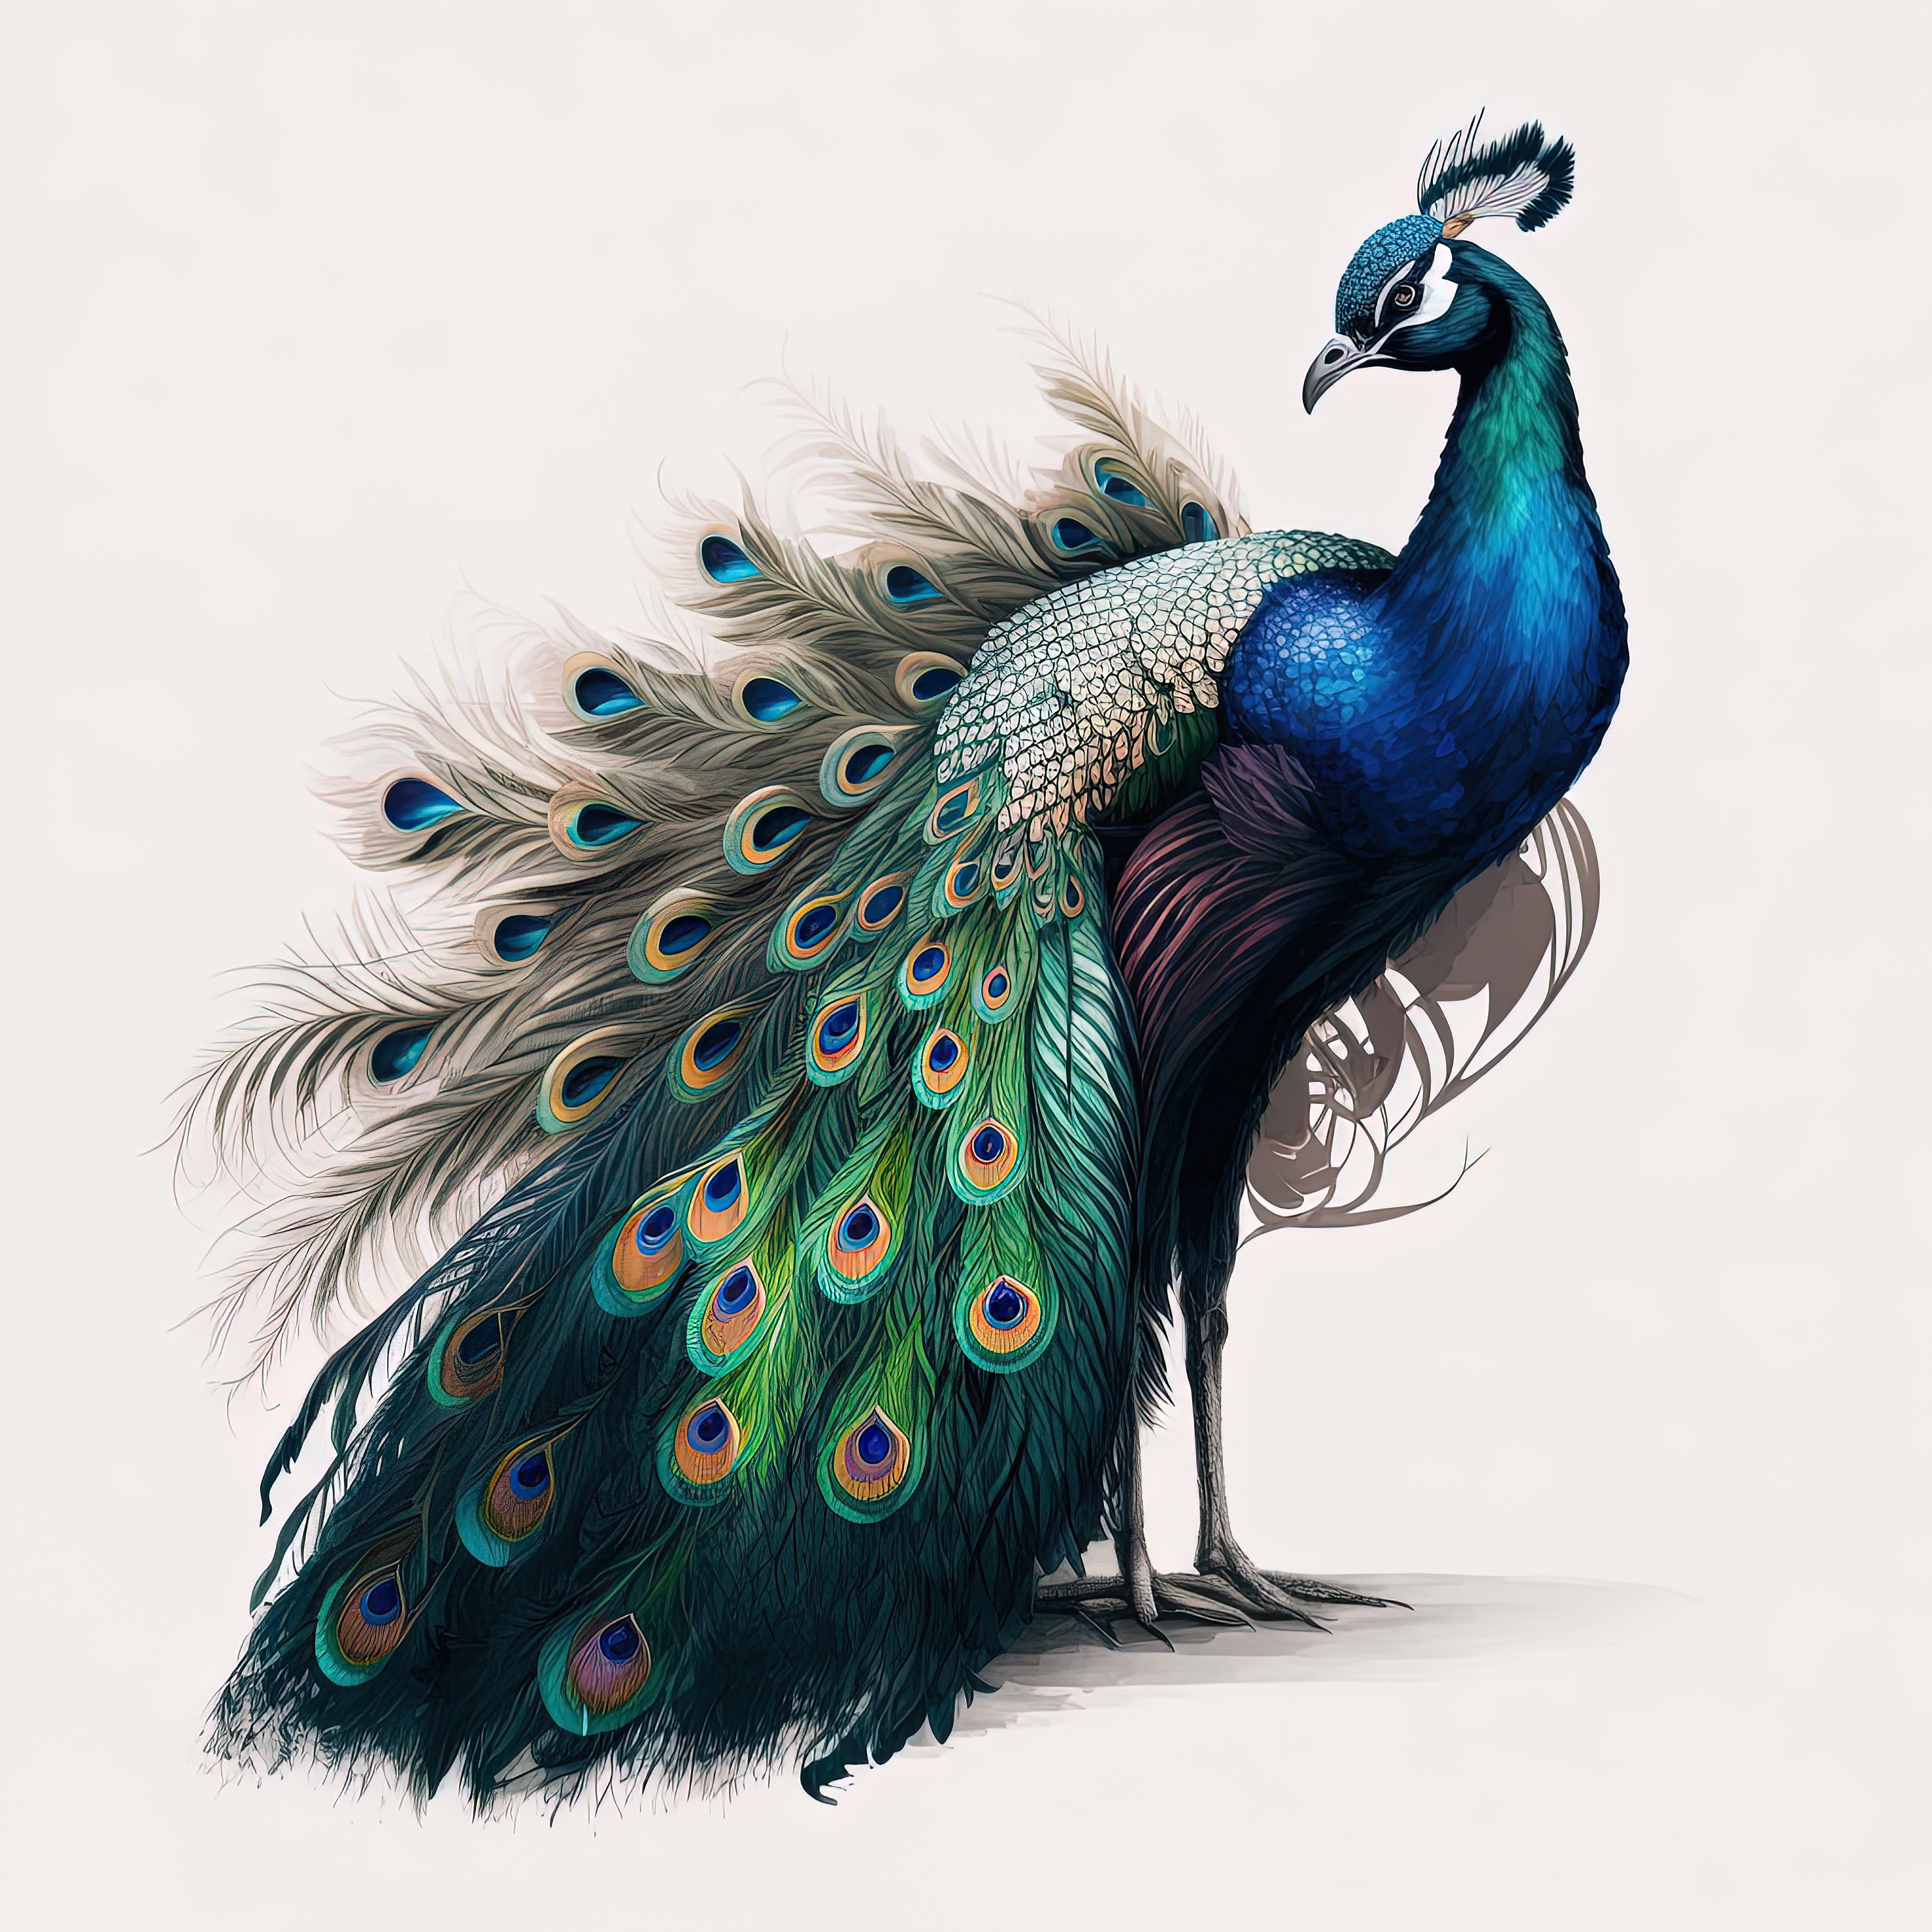 Do Peacocks Pay a Price for Beauty?